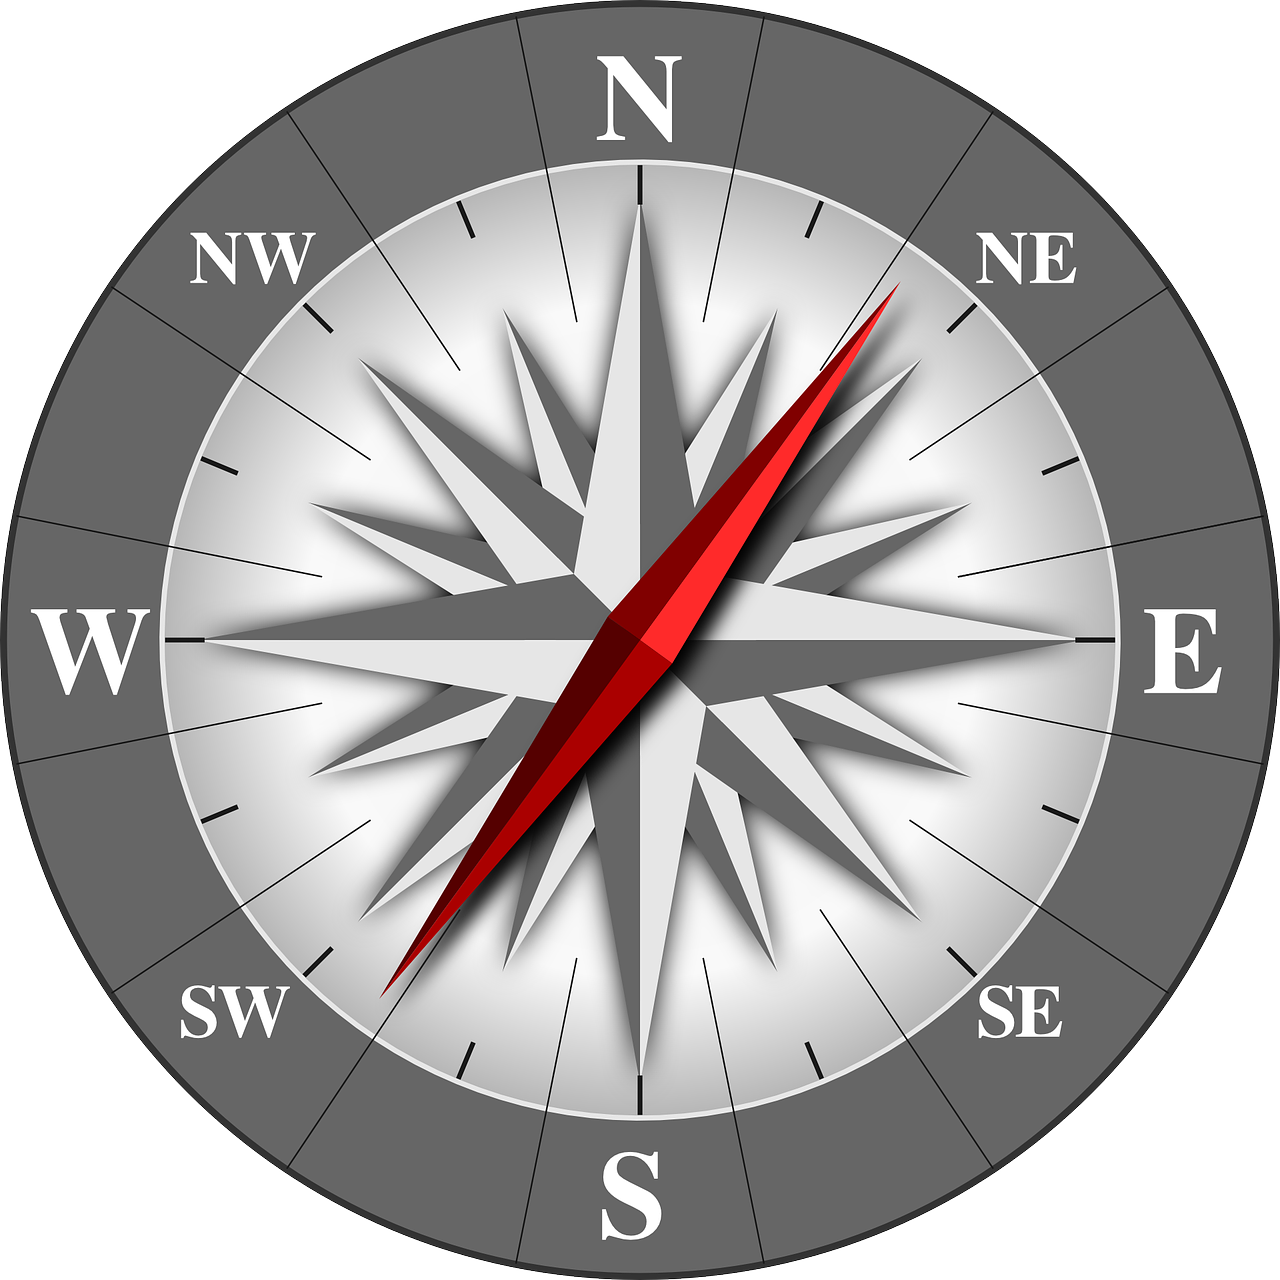 Compass Rose Four Cardinal Directions North East South West White